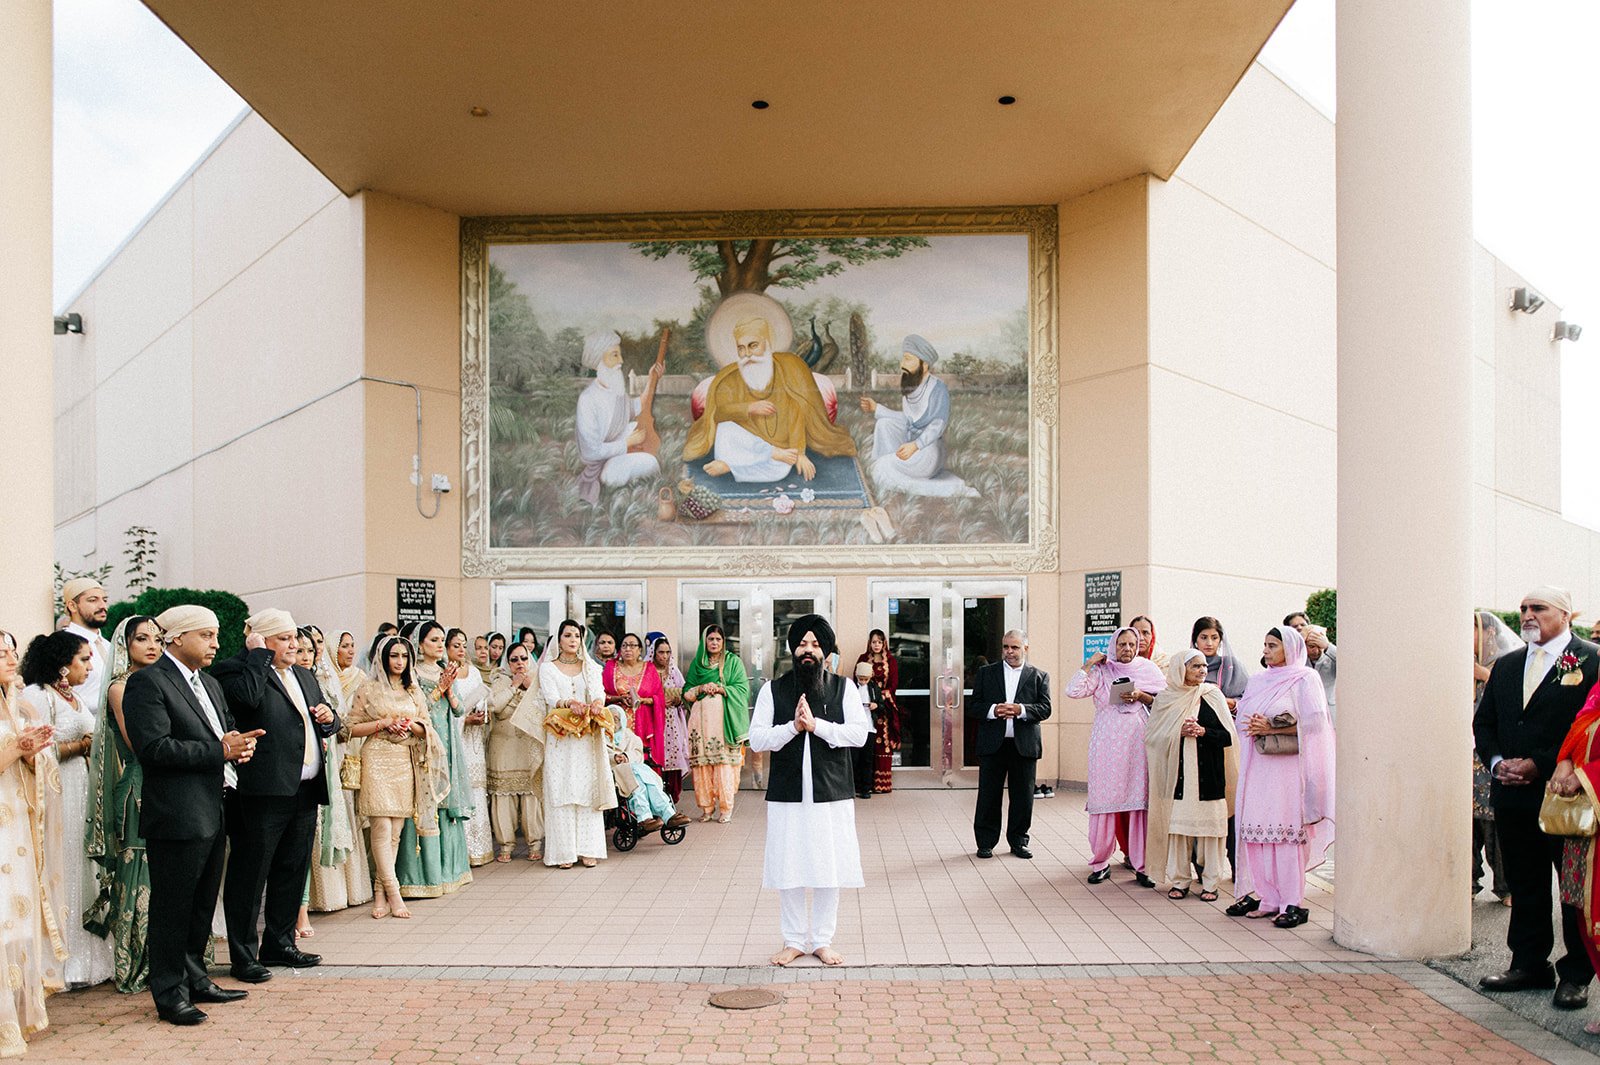 Two families pray outside a gurdwara before a wedding ceremony in Richmond, BC.